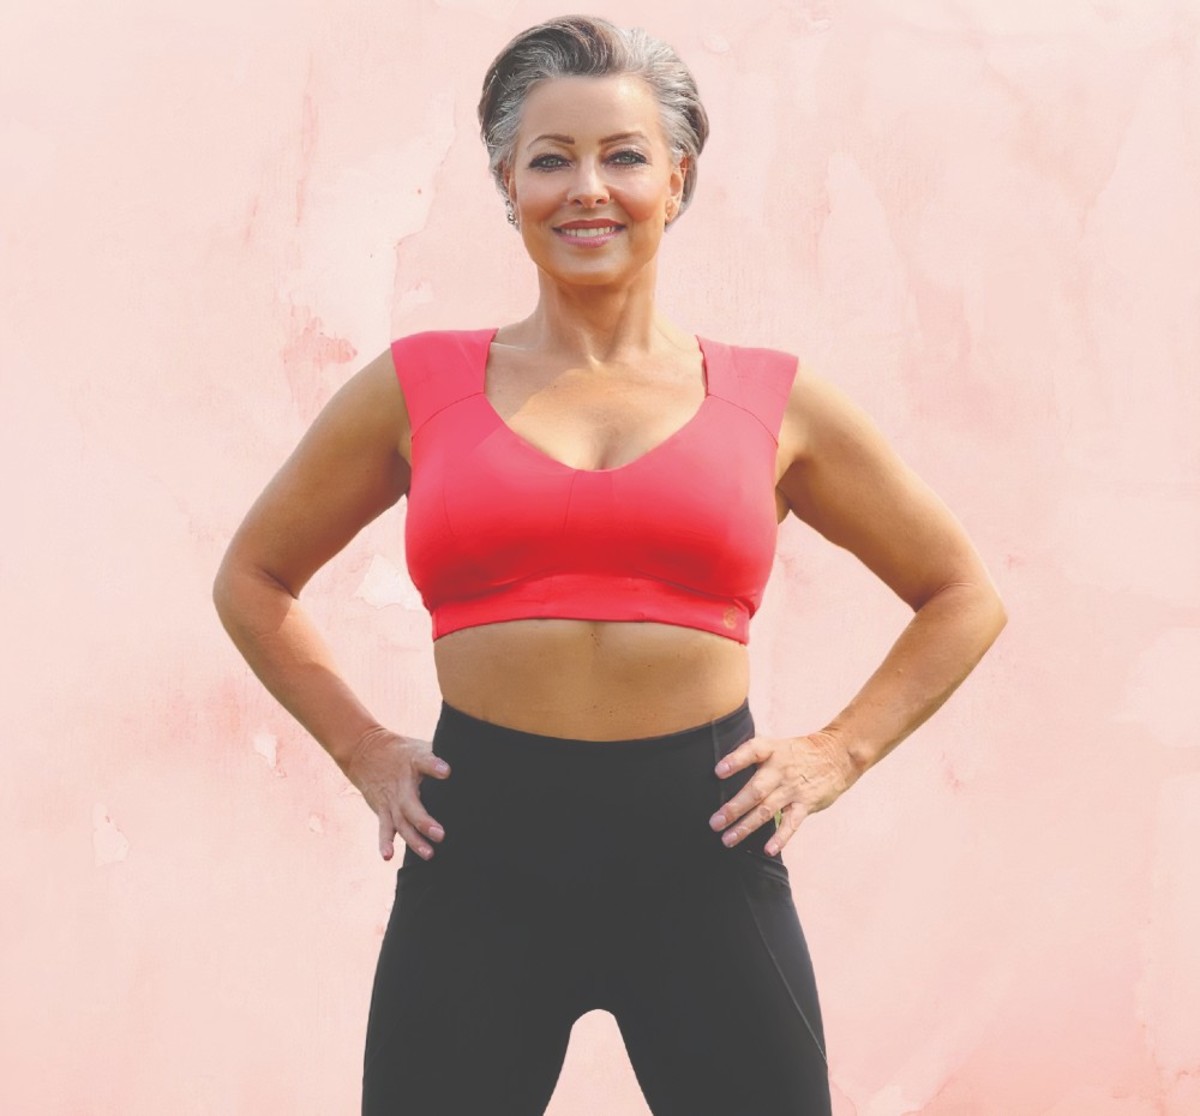 Three Local Companies Set the Standard for Sports Bras